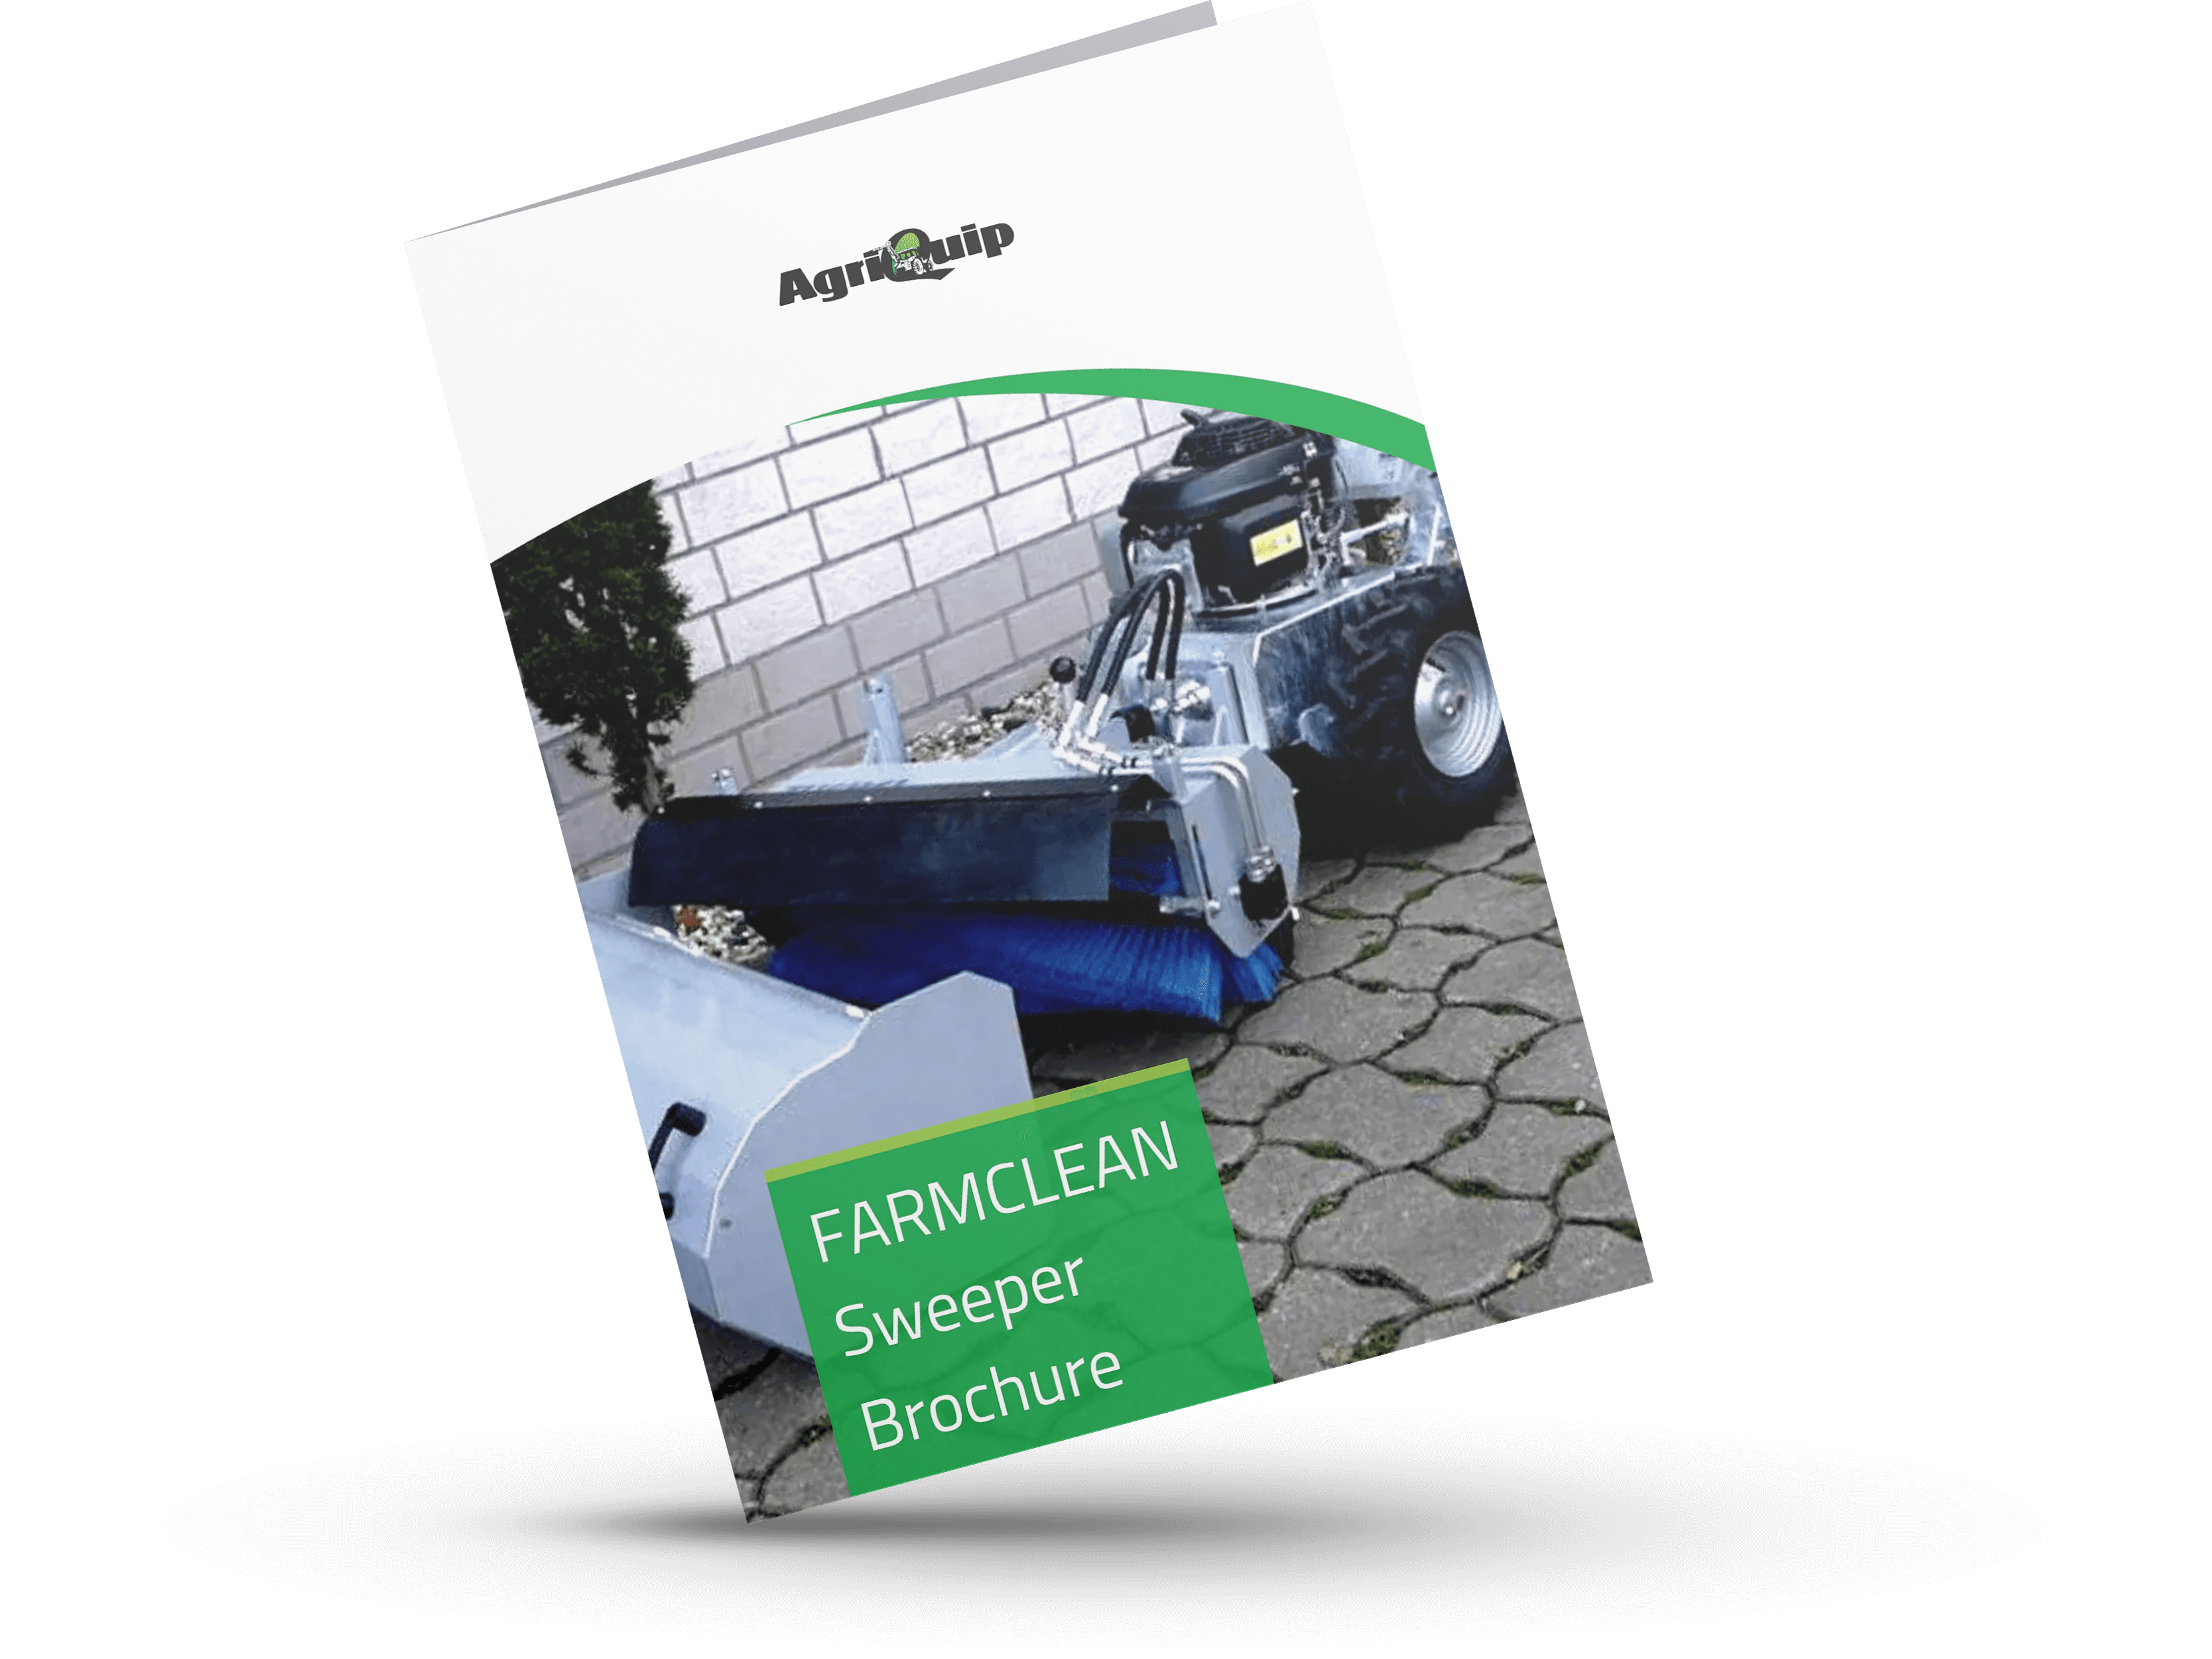 Download our FARMCLEAN sweeper brochure